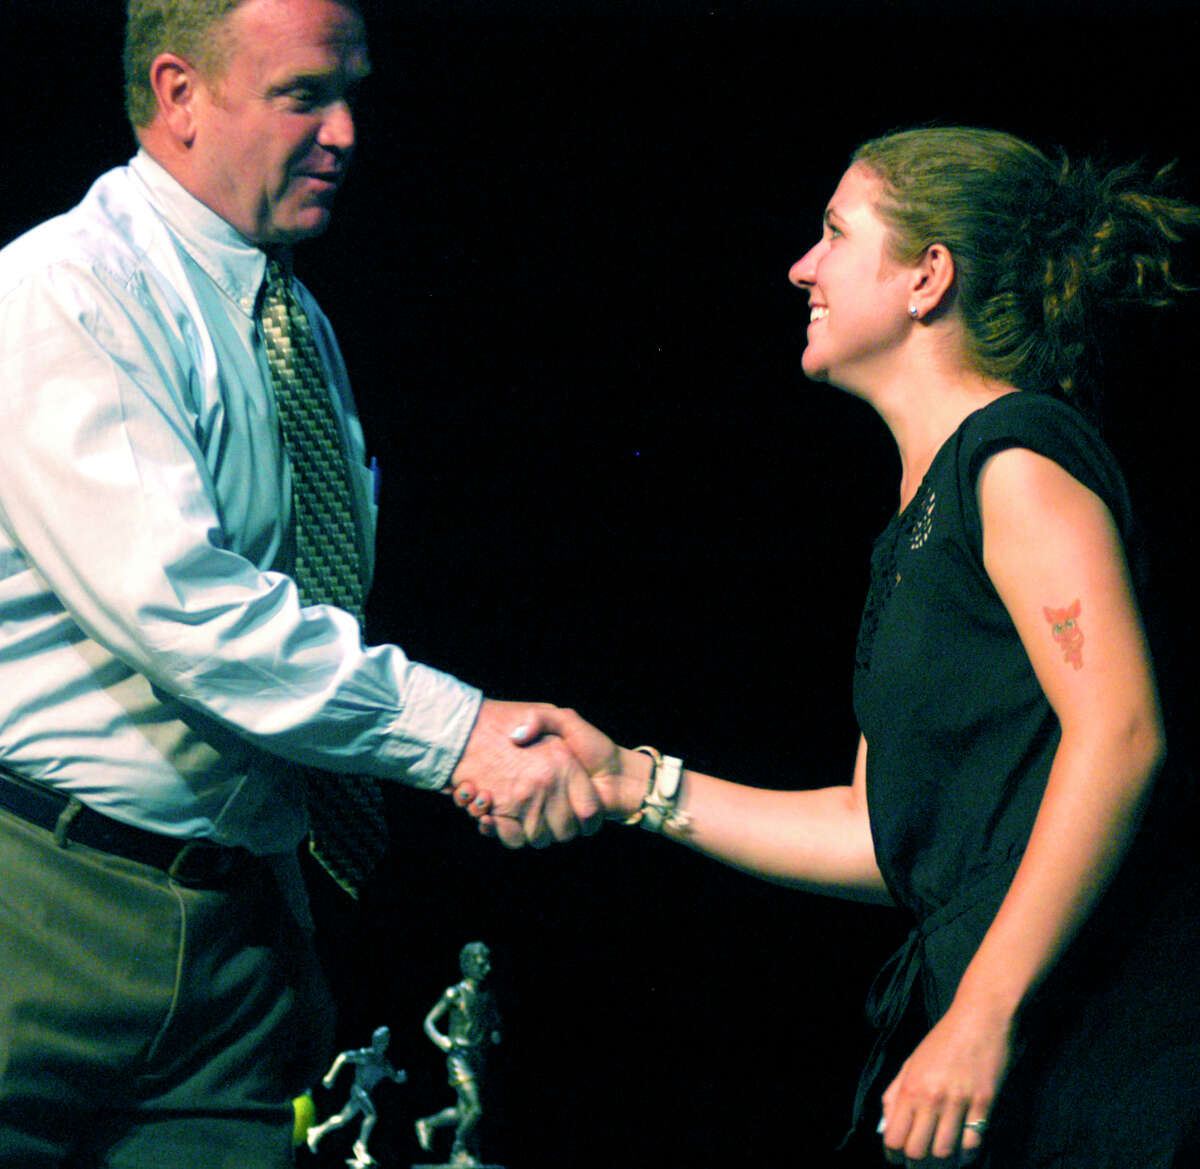 Scholar-athlete New Milford High School senior Faith Eherts is congratulated Monday by Green Wave girls' lacrosse coach Bill Kersten as the team's scholar-athlete for this spring. Faith and her fellow Green Wave student athletes were honored during the school's annual spring sports awards ceremony. For the story and more photos, see next week's Greater New Miford Spectrum and check www.newmifordspectrum.com.